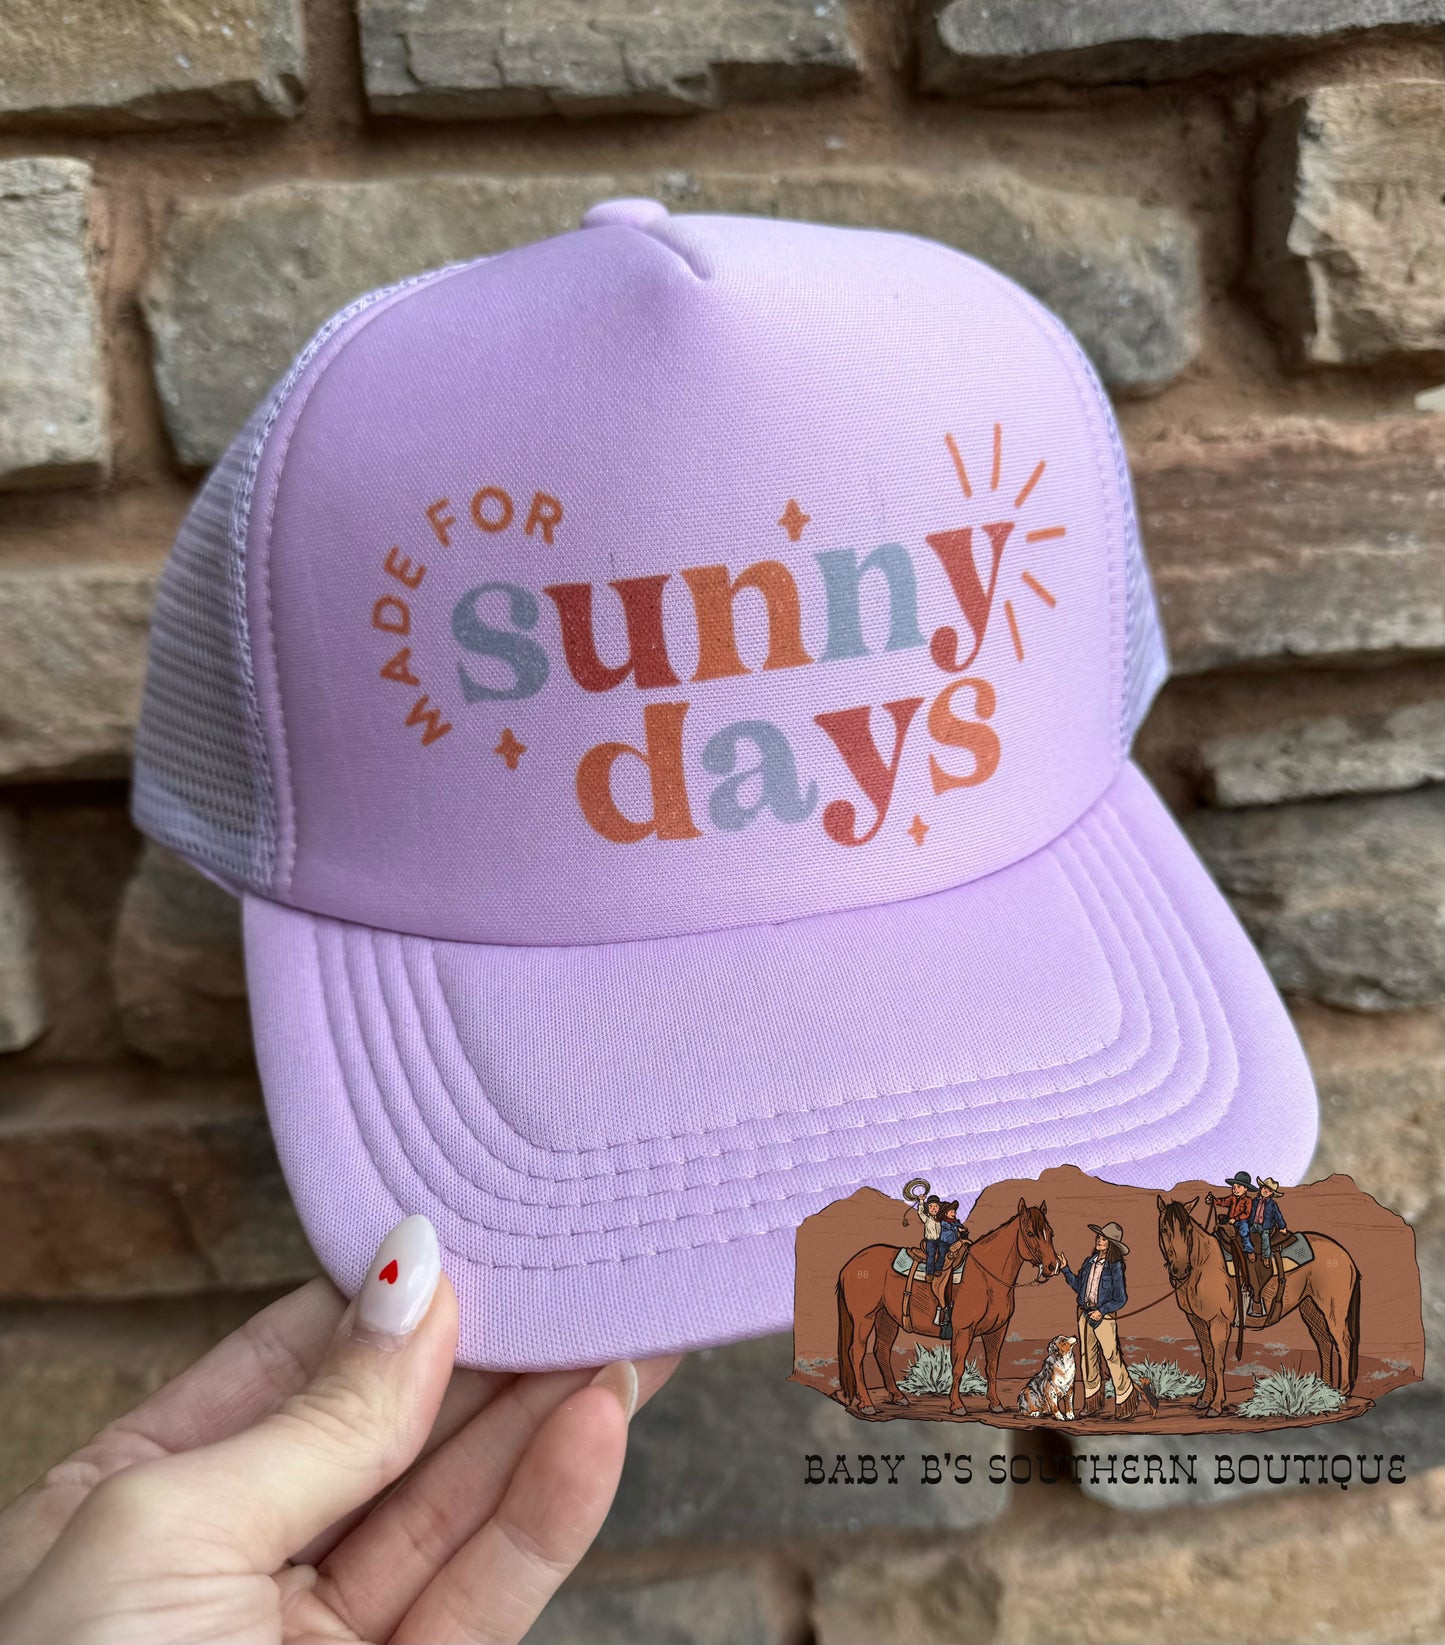 Made For Sunny Days Adult Trucker Hat